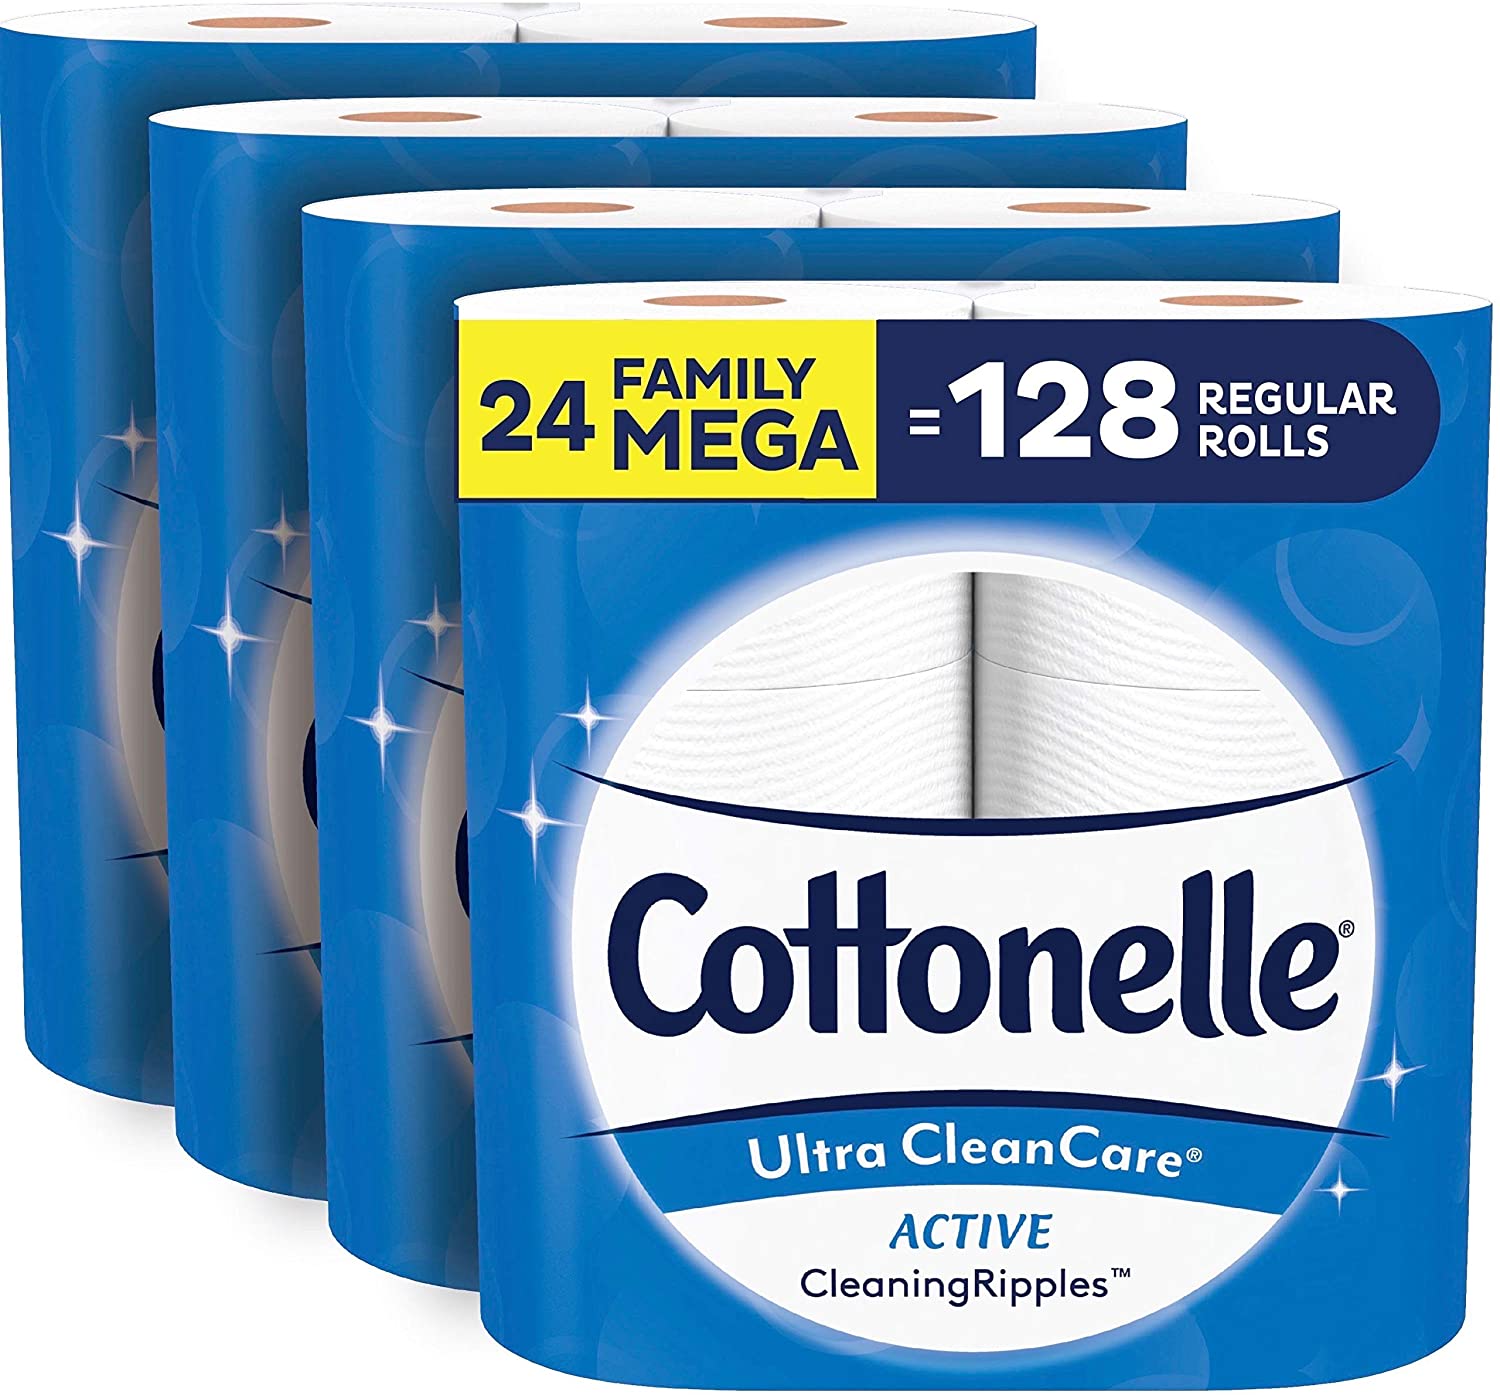 24-Ct Cottonelle Family Mega Rolls Toilet Paper (Ultra CleanCare) $21.67 w/ S&S + Free Shipping w/ Prime or on $25+